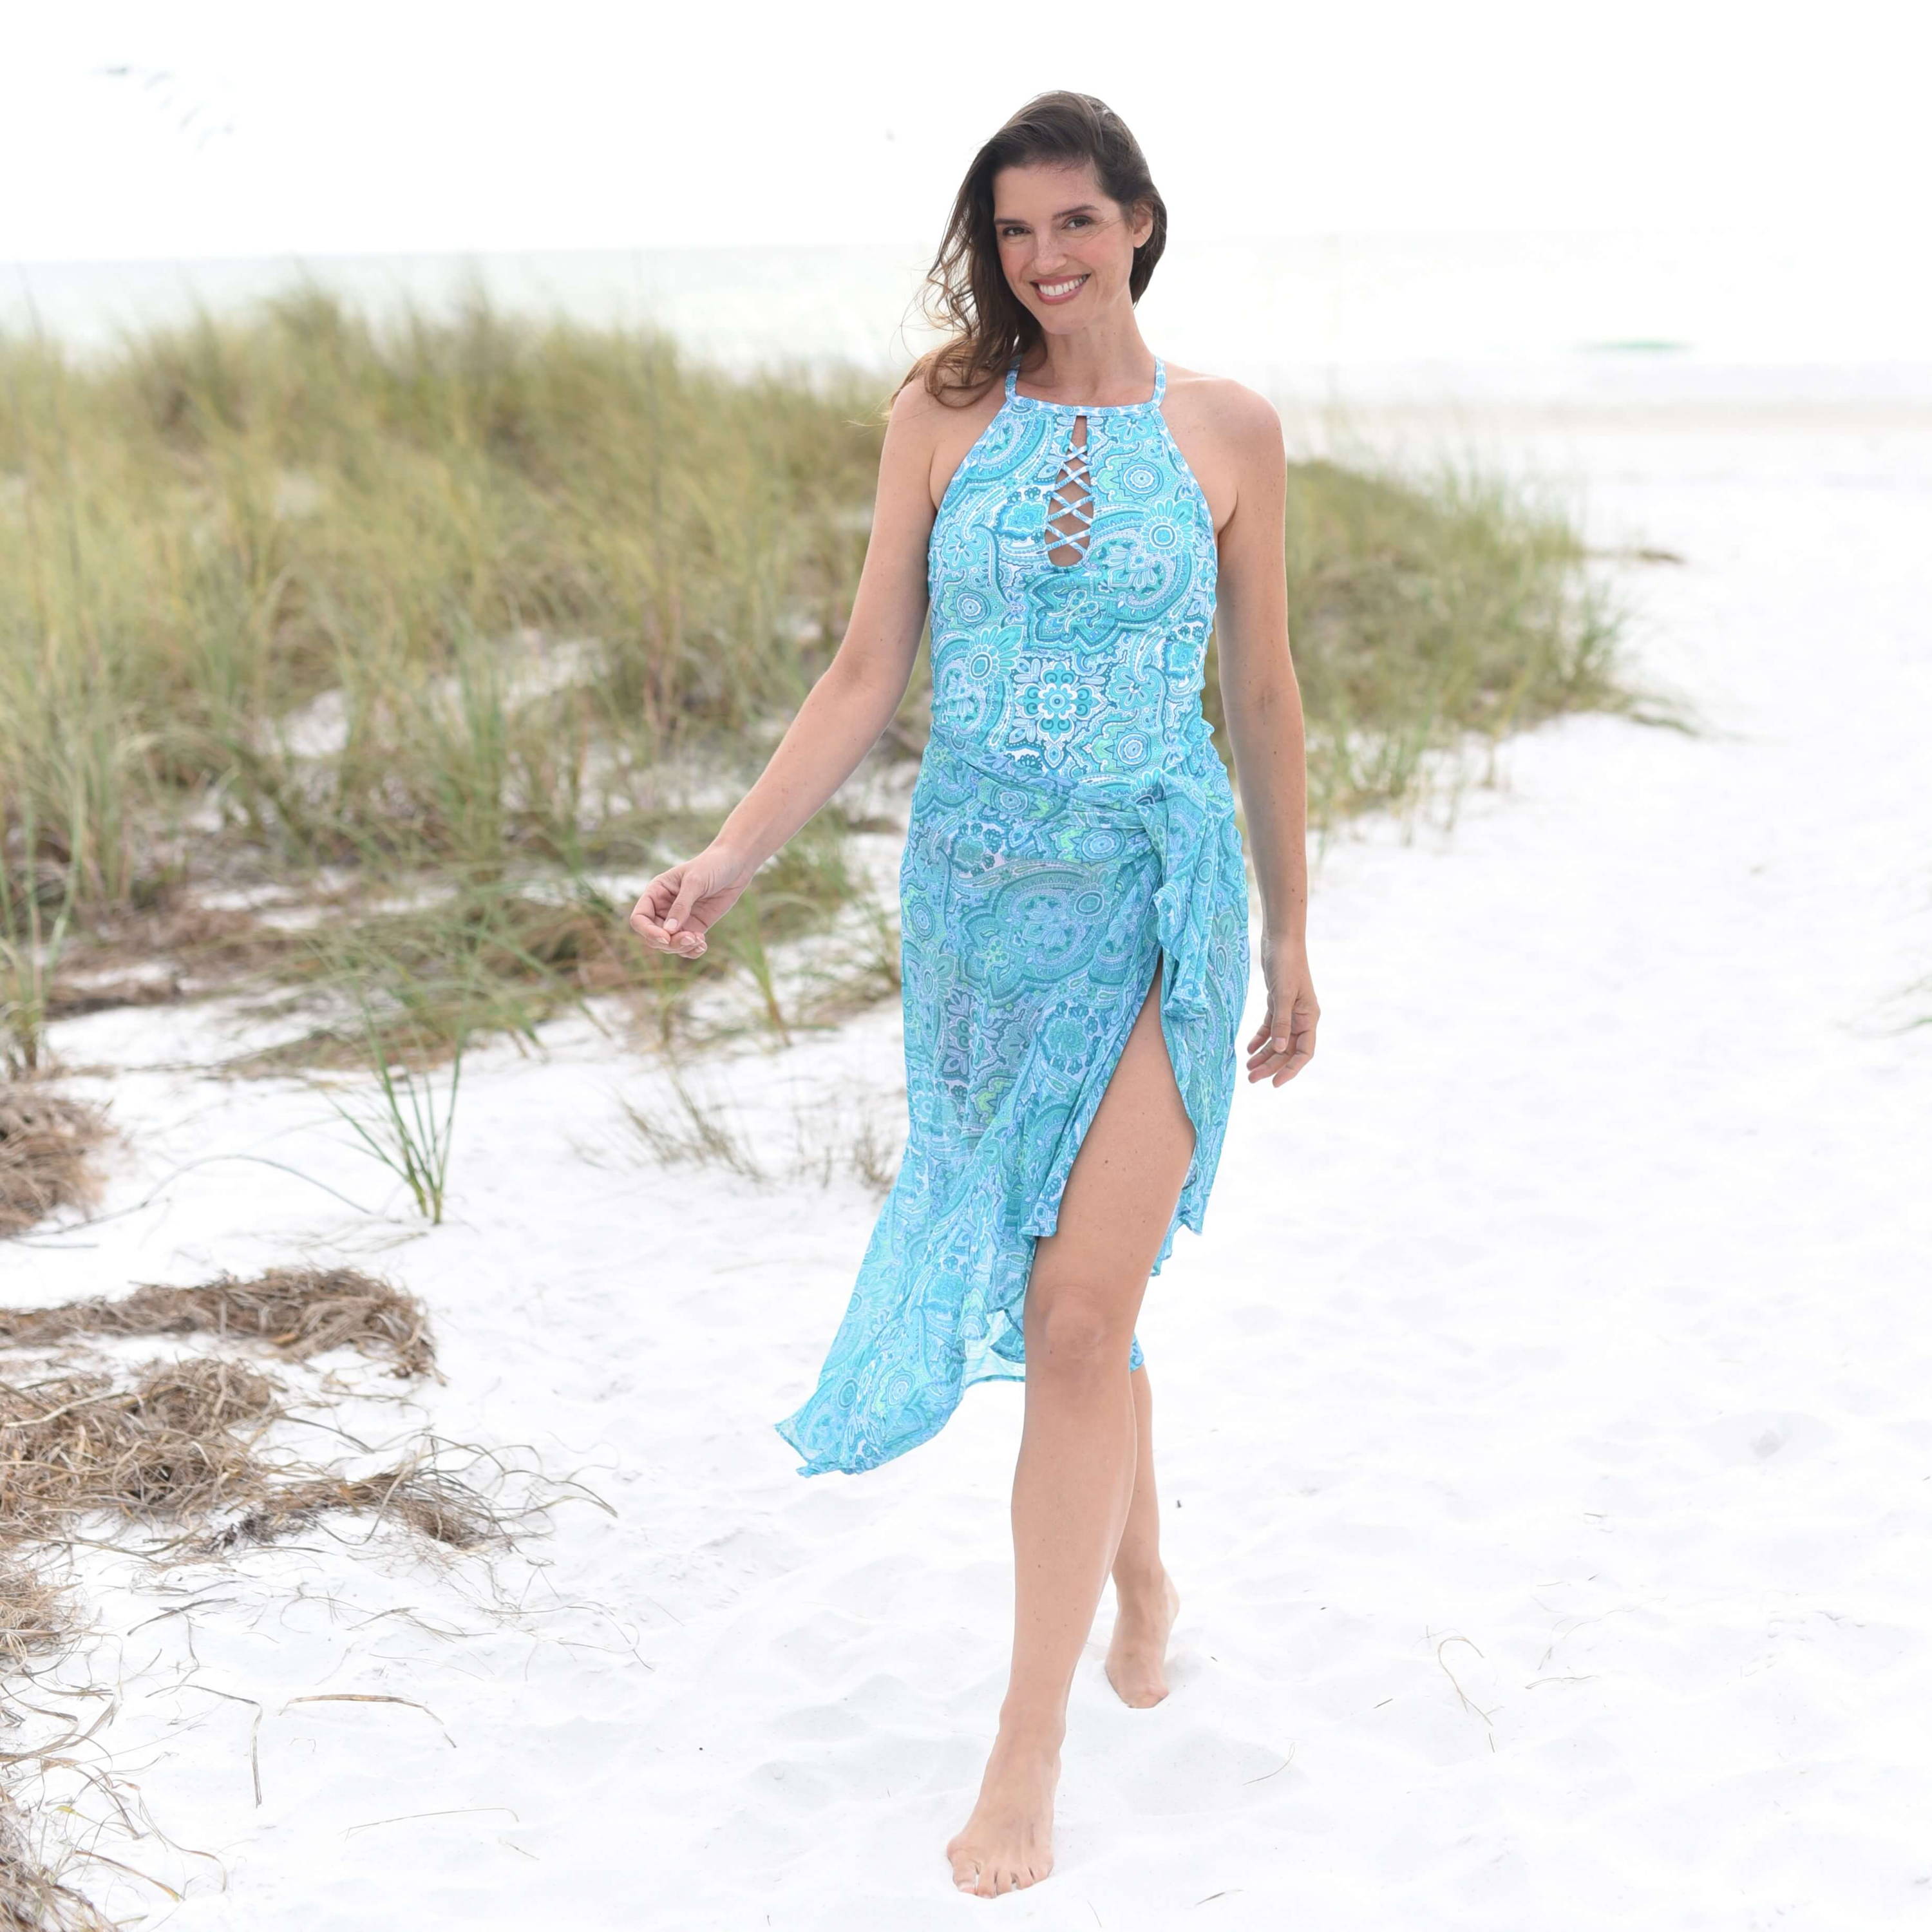 A smiling brunette woman wearing a blue bathing suit and sarong walks across the sand at the beach